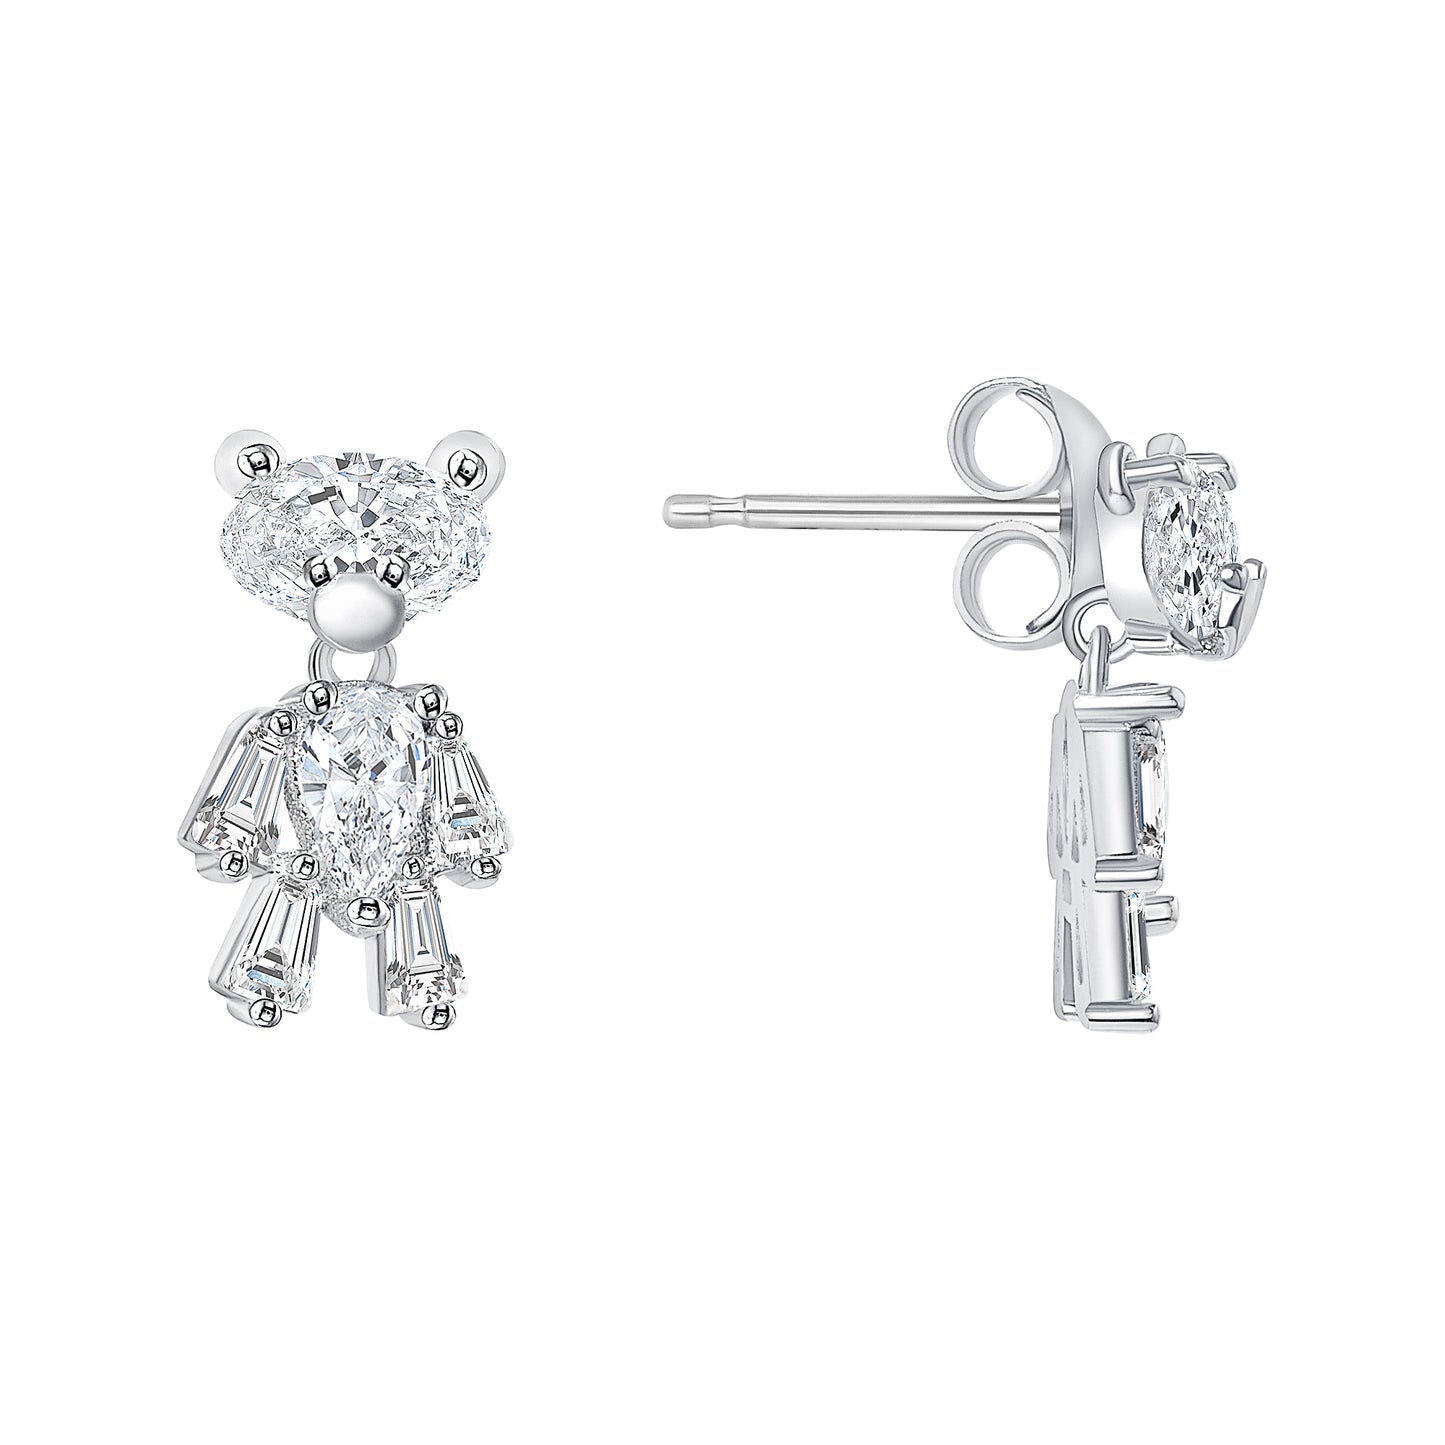 Silver 925 Rhodium Plated Baguette Style Stud Earring. BE11046